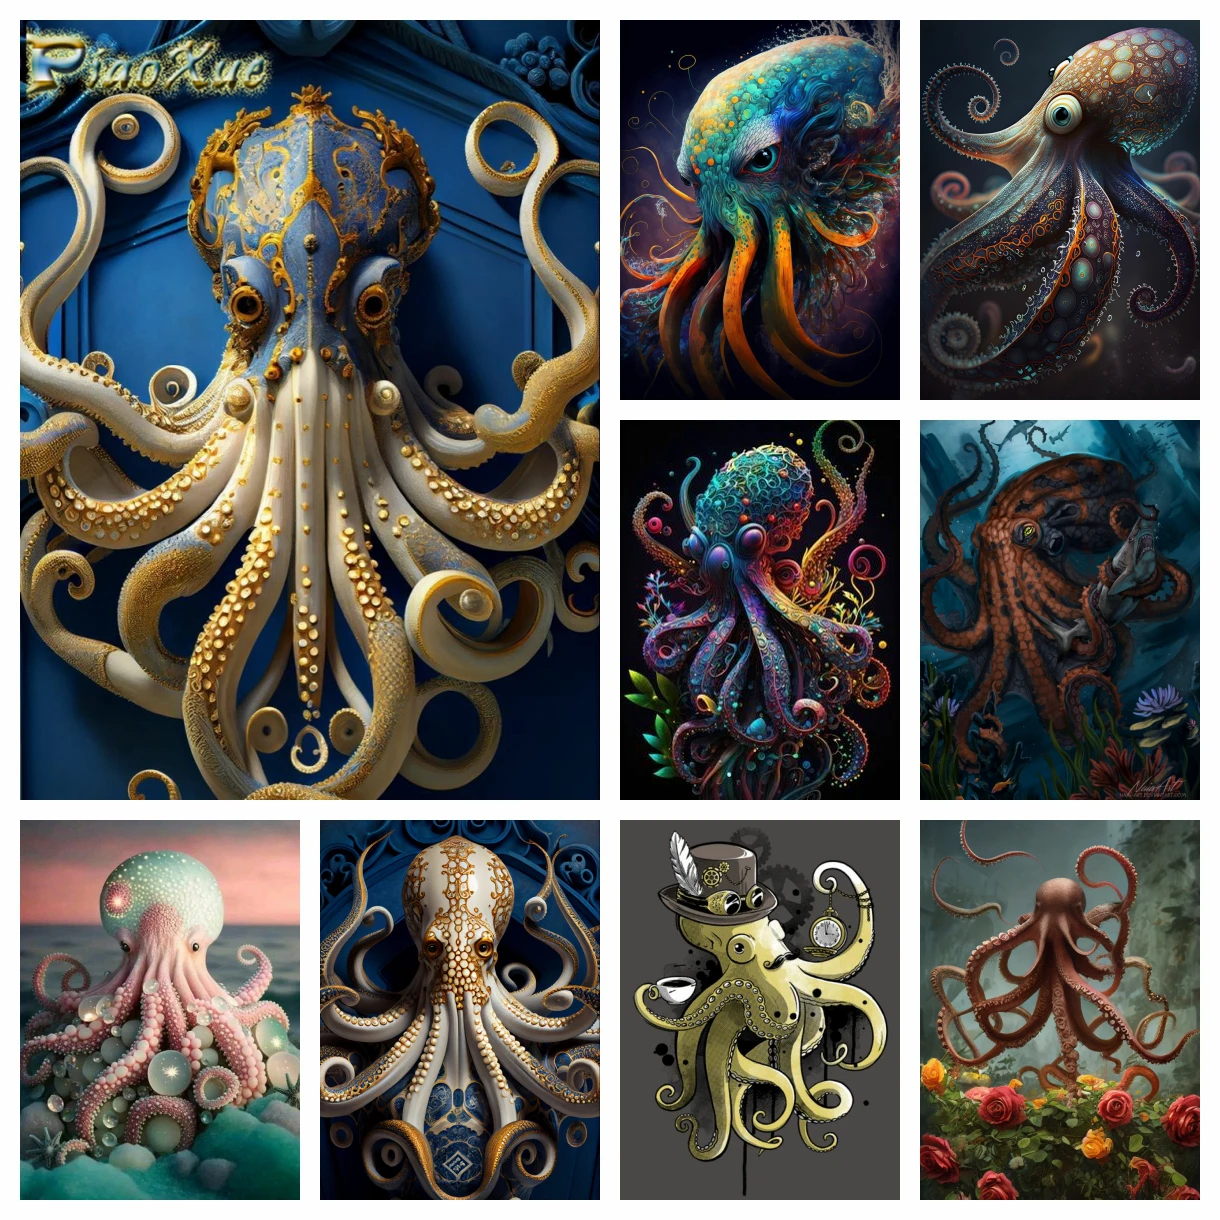 

Gothic Octopus Art Cross Stitch Kits Diy Diamond Painting Metal Poster Steampunk Full Embroidery Set Home Wall Decor Craft